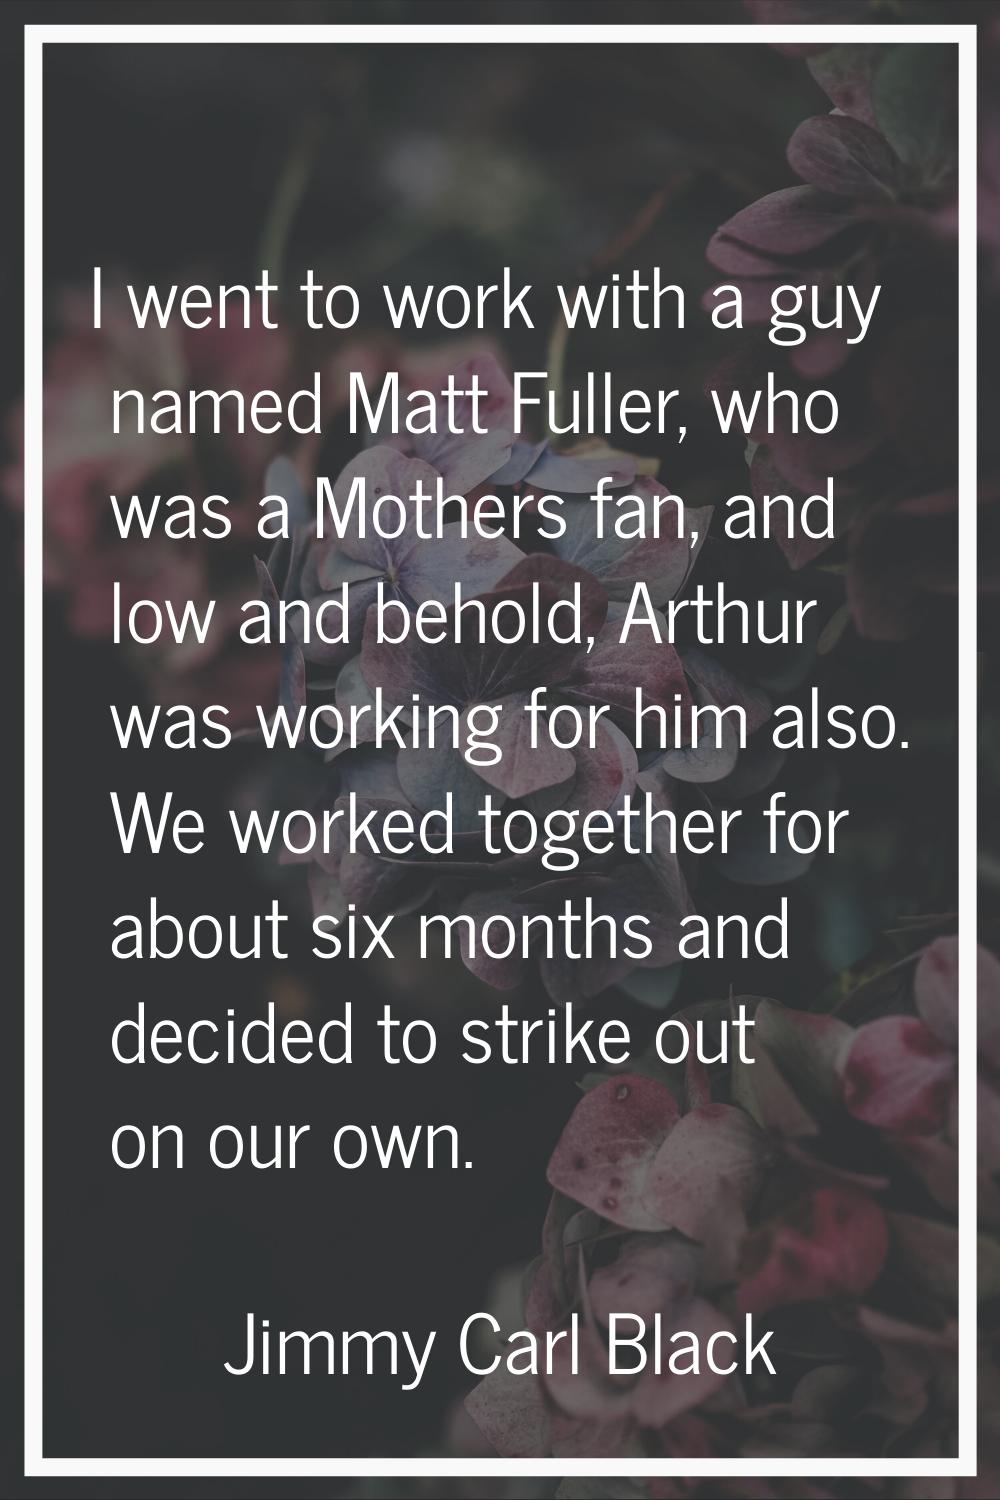 I went to work with a guy named Matt Fuller, who was a Mothers fan, and low and behold, Arthur was 